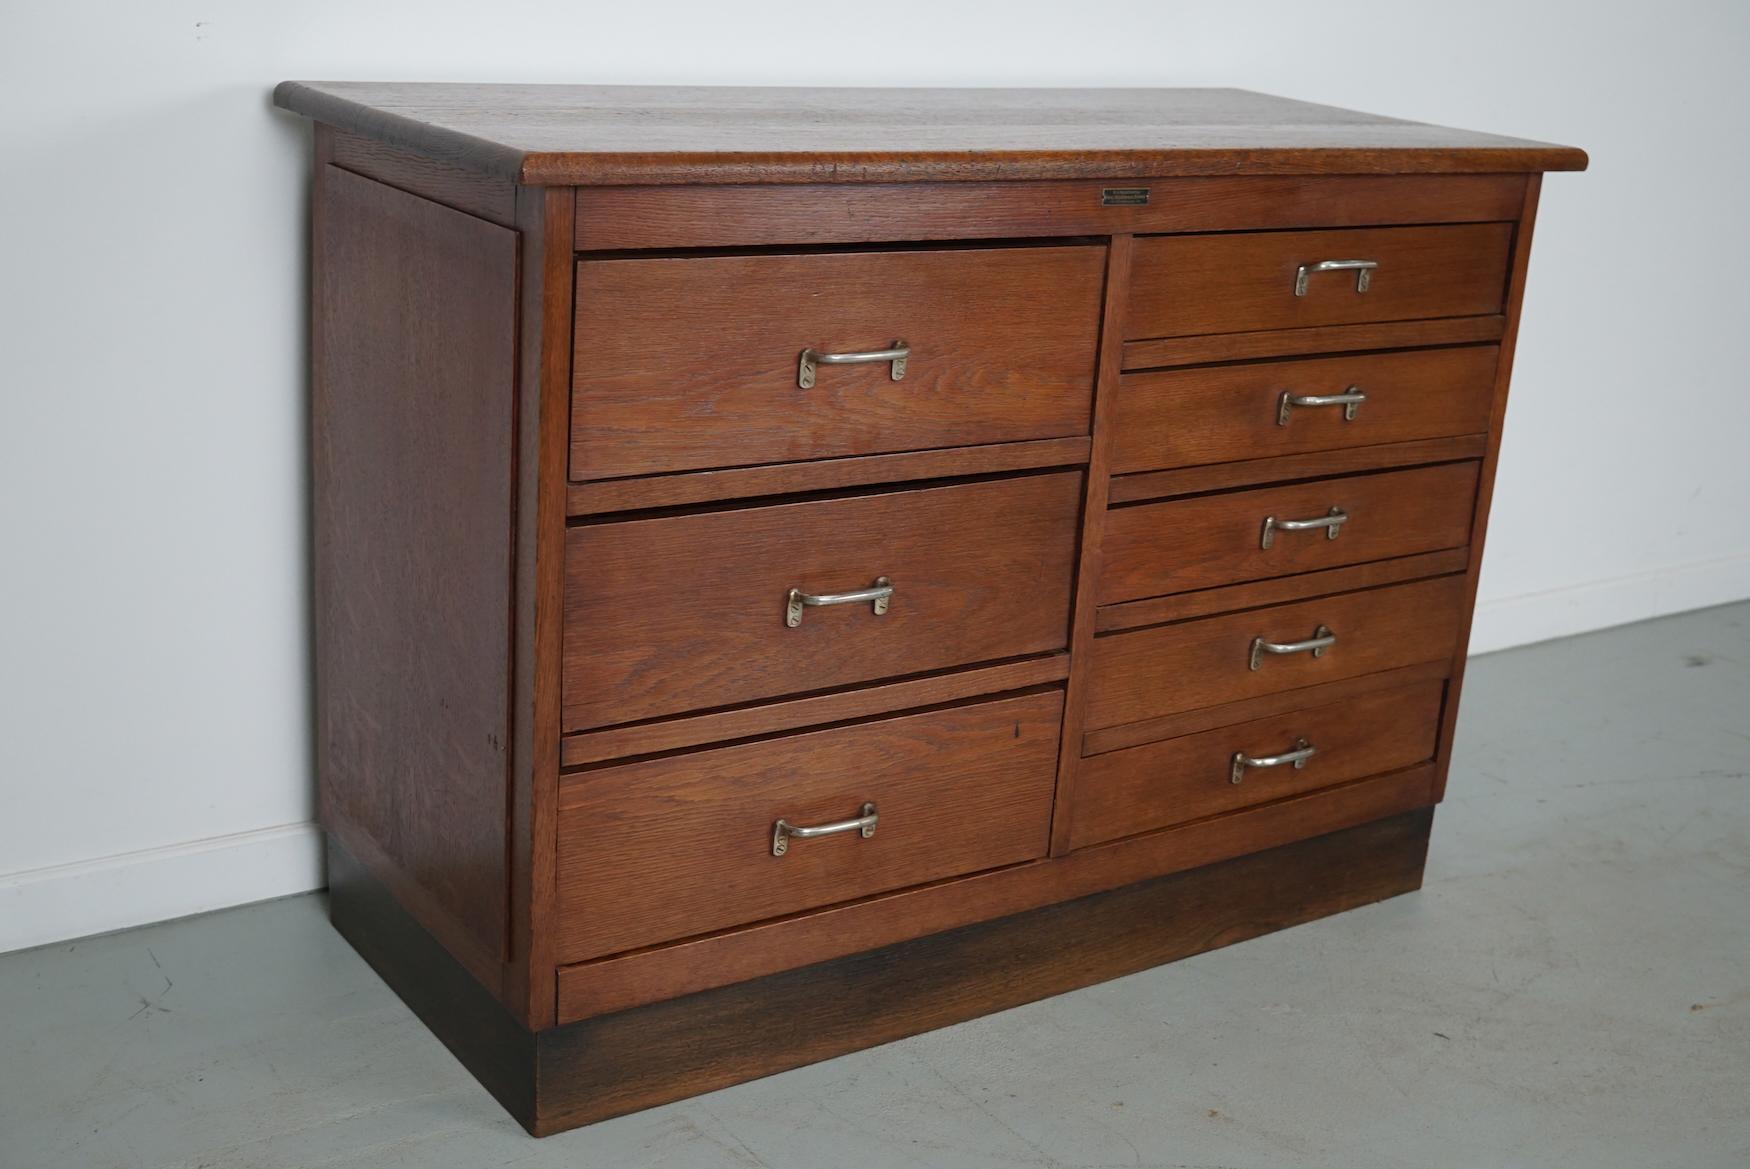 This apothecary cabinet was made circa 1950s in the Netherlands. The cabinet was used in a workshop. It features 8 drawers in 2 different sizes with metal handles. The interior dimensions of the drawers are: D W H 37 x 45 x 14 and 7.5 cm.